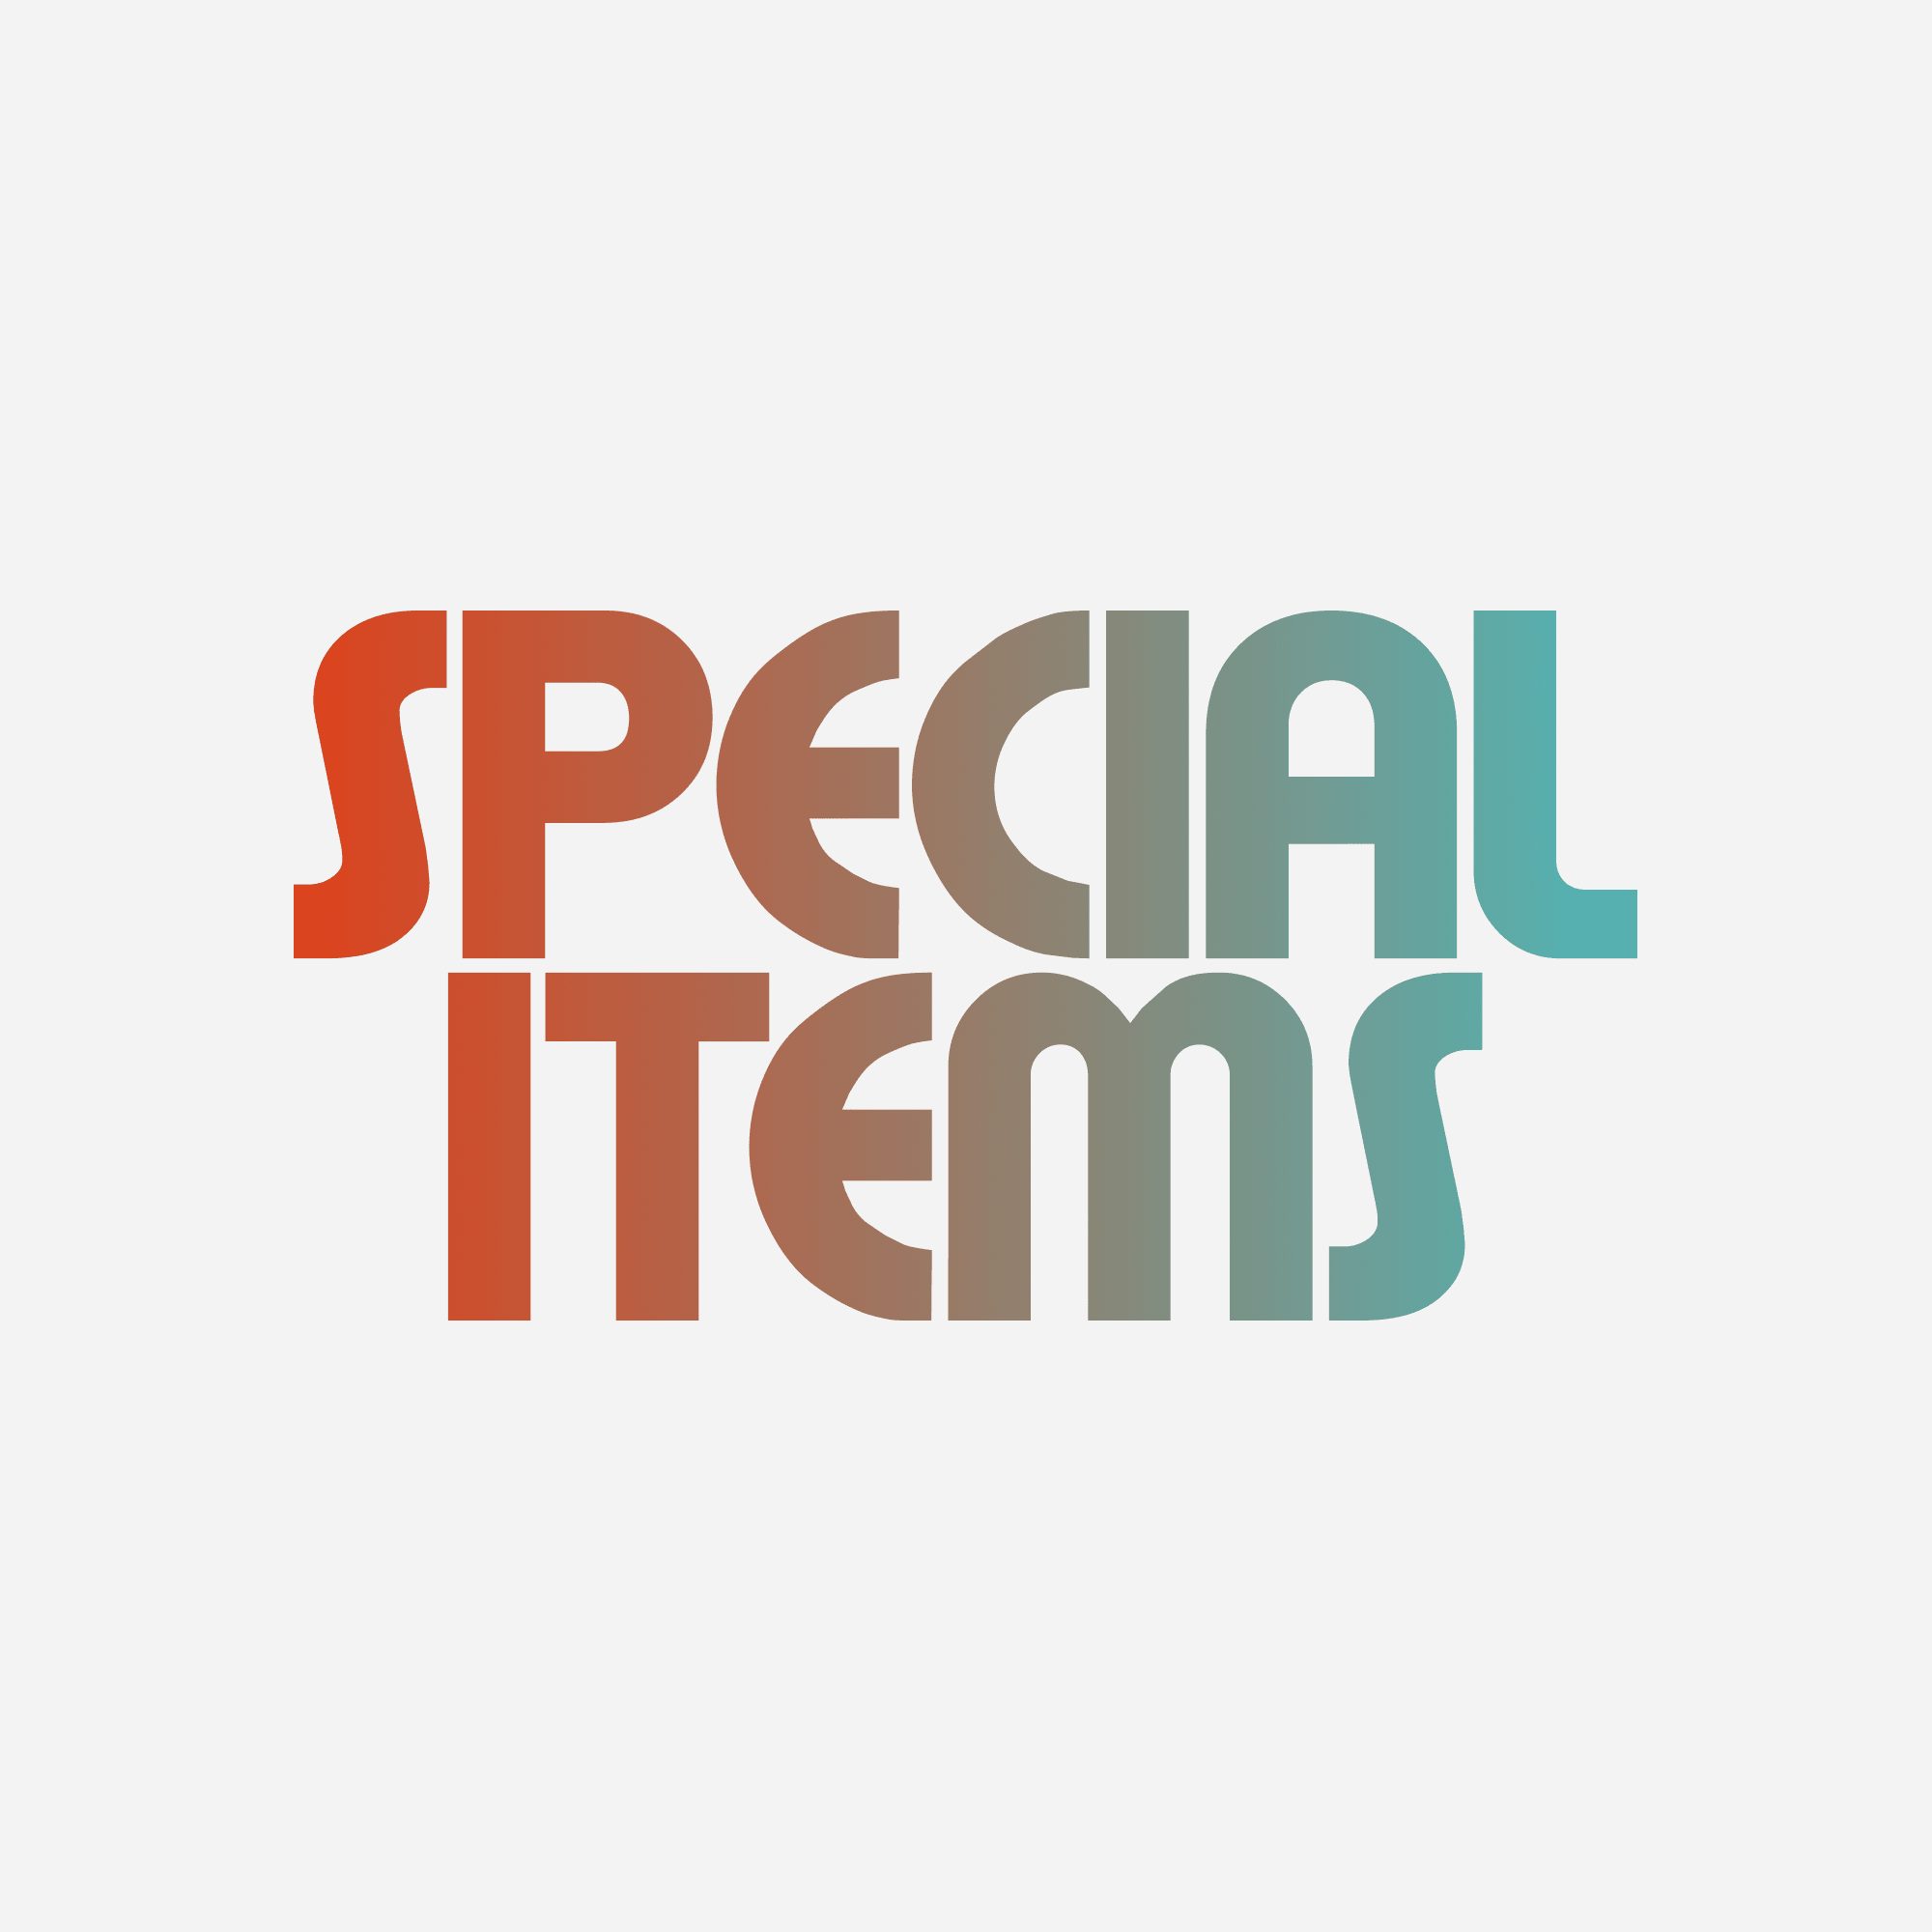 SPECIAL_ITEMS